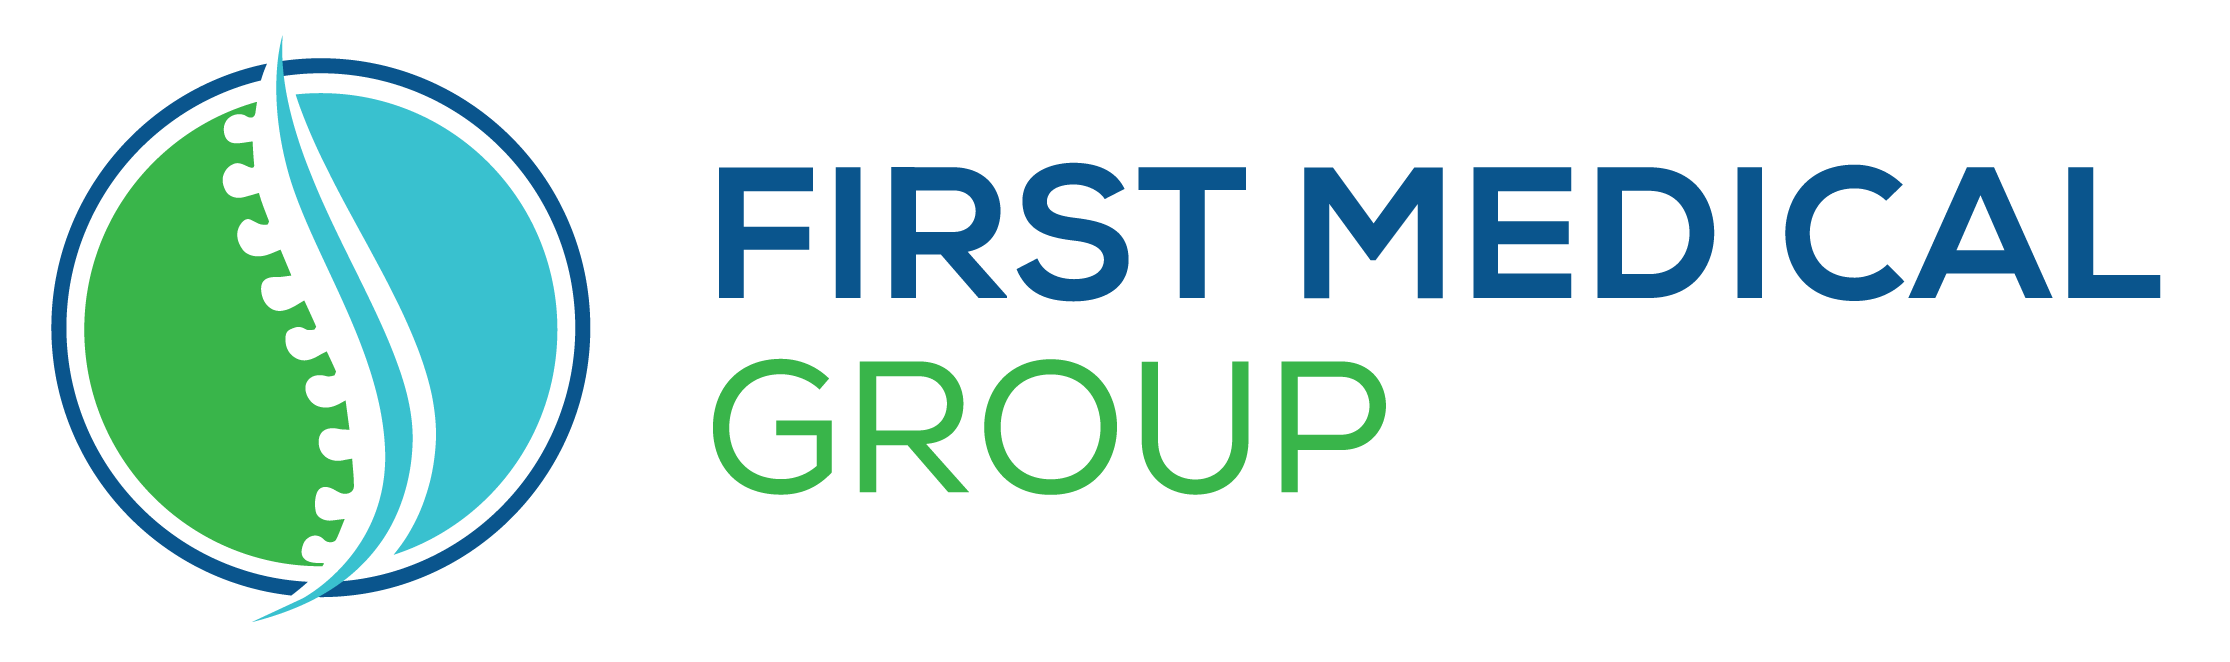 First Medical Group